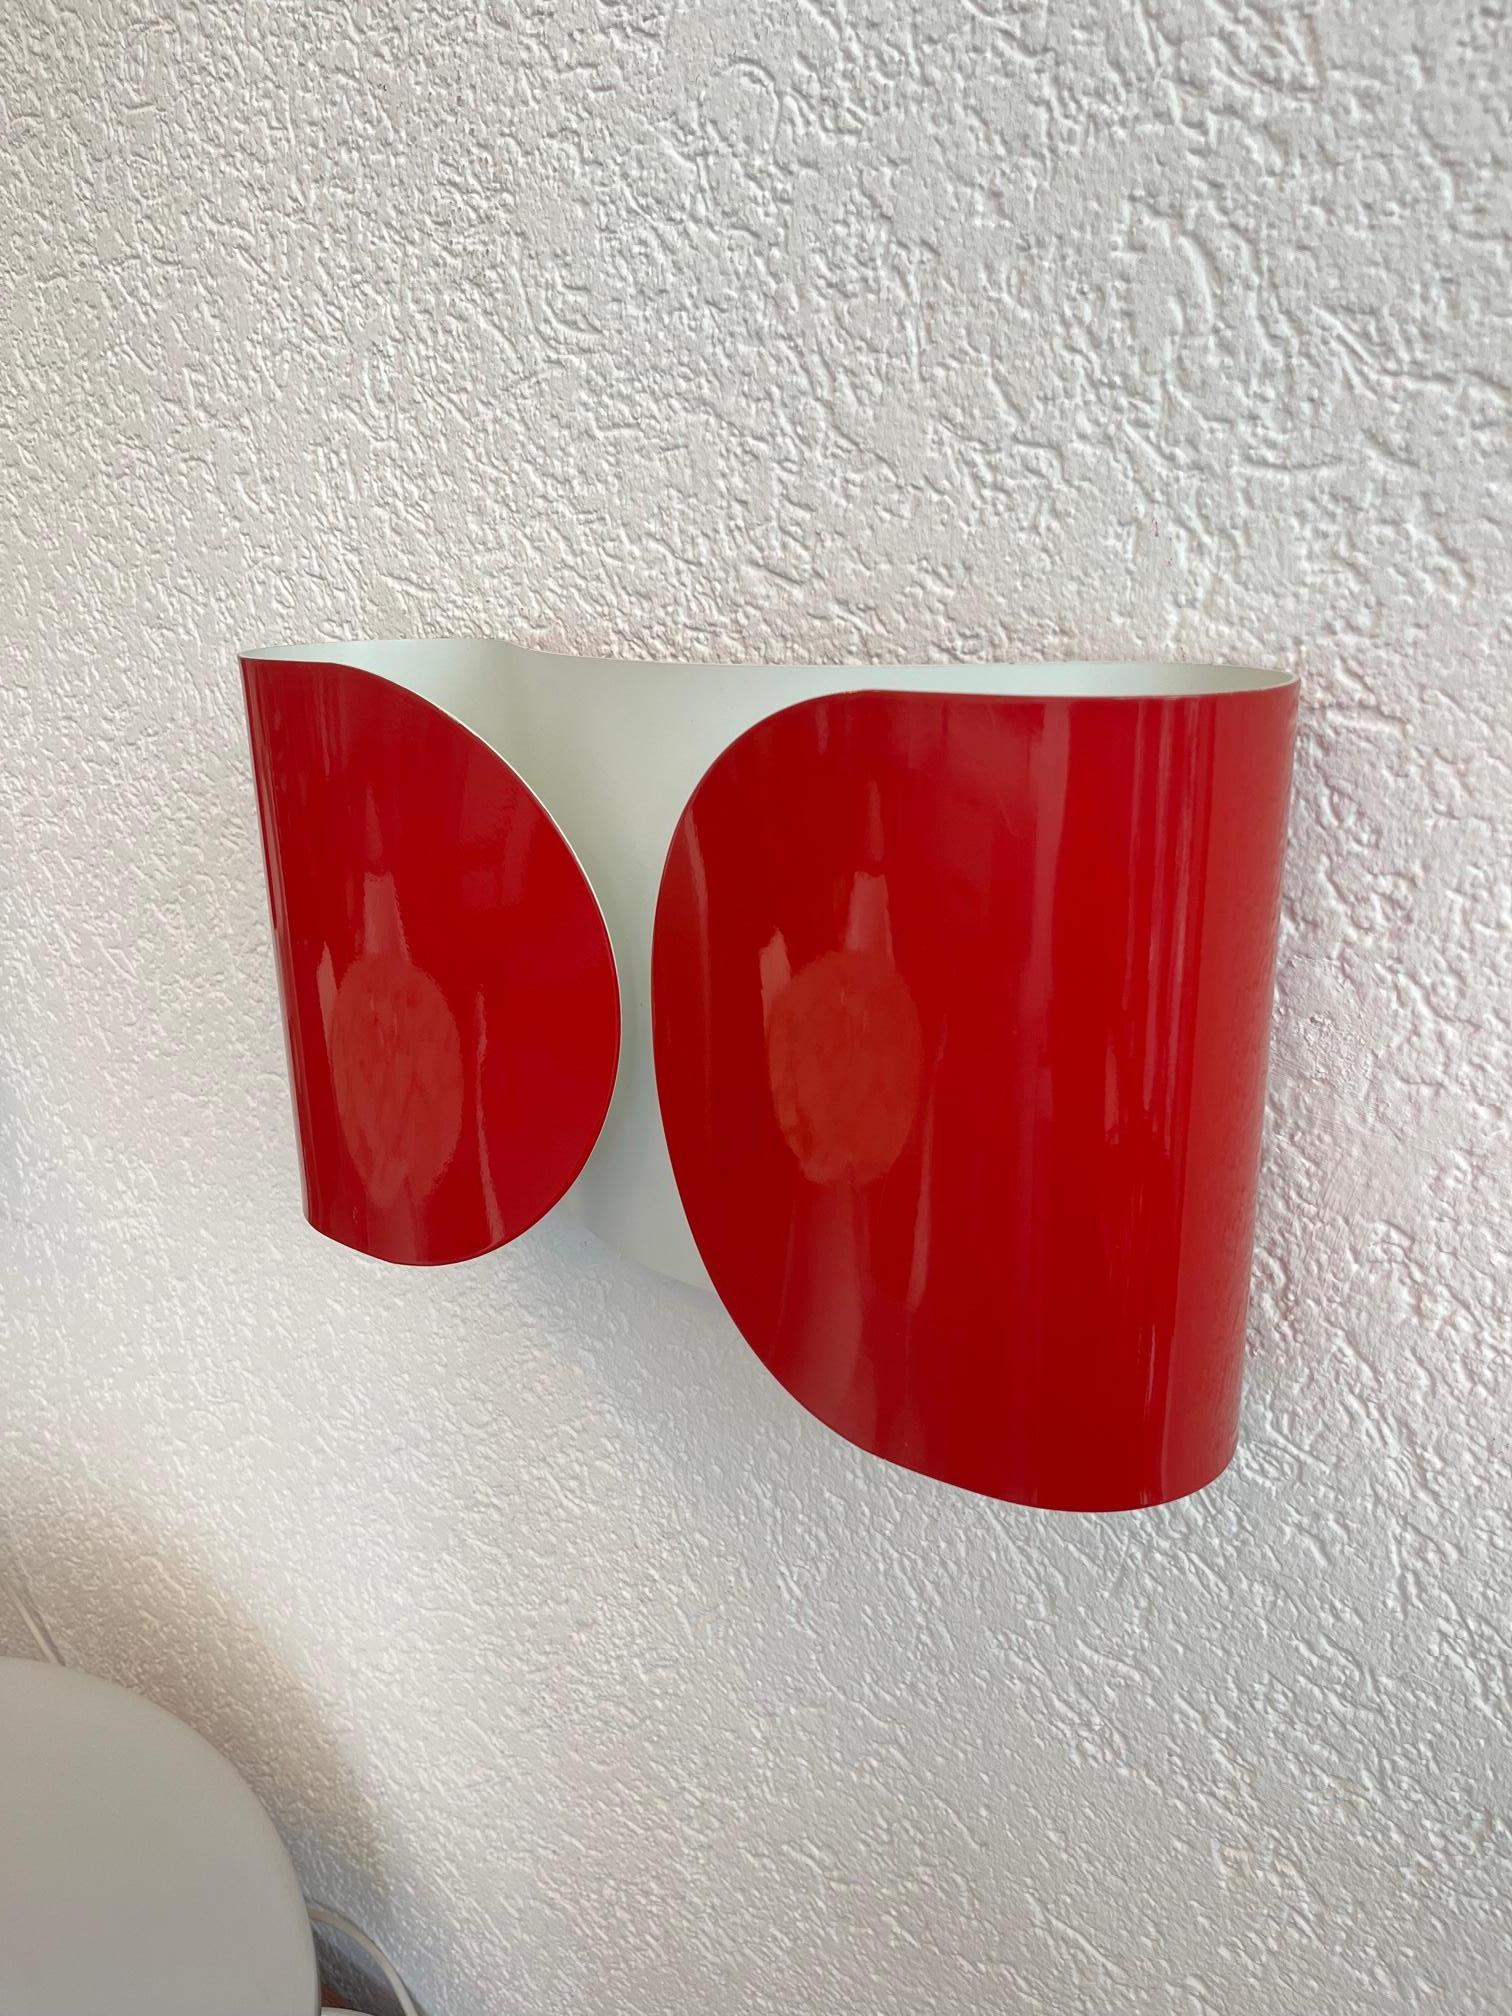 Set of 3 Foglio wall lamp in rare red color, designed by Tobia Scarpa and produced by Flos, Italy ca. 1966.
Very hard to fin in red. Very good condition. 
L 37 x D 10 x H 21 cm

The 1966 Foglio wall light illustrates the most alluring qualities